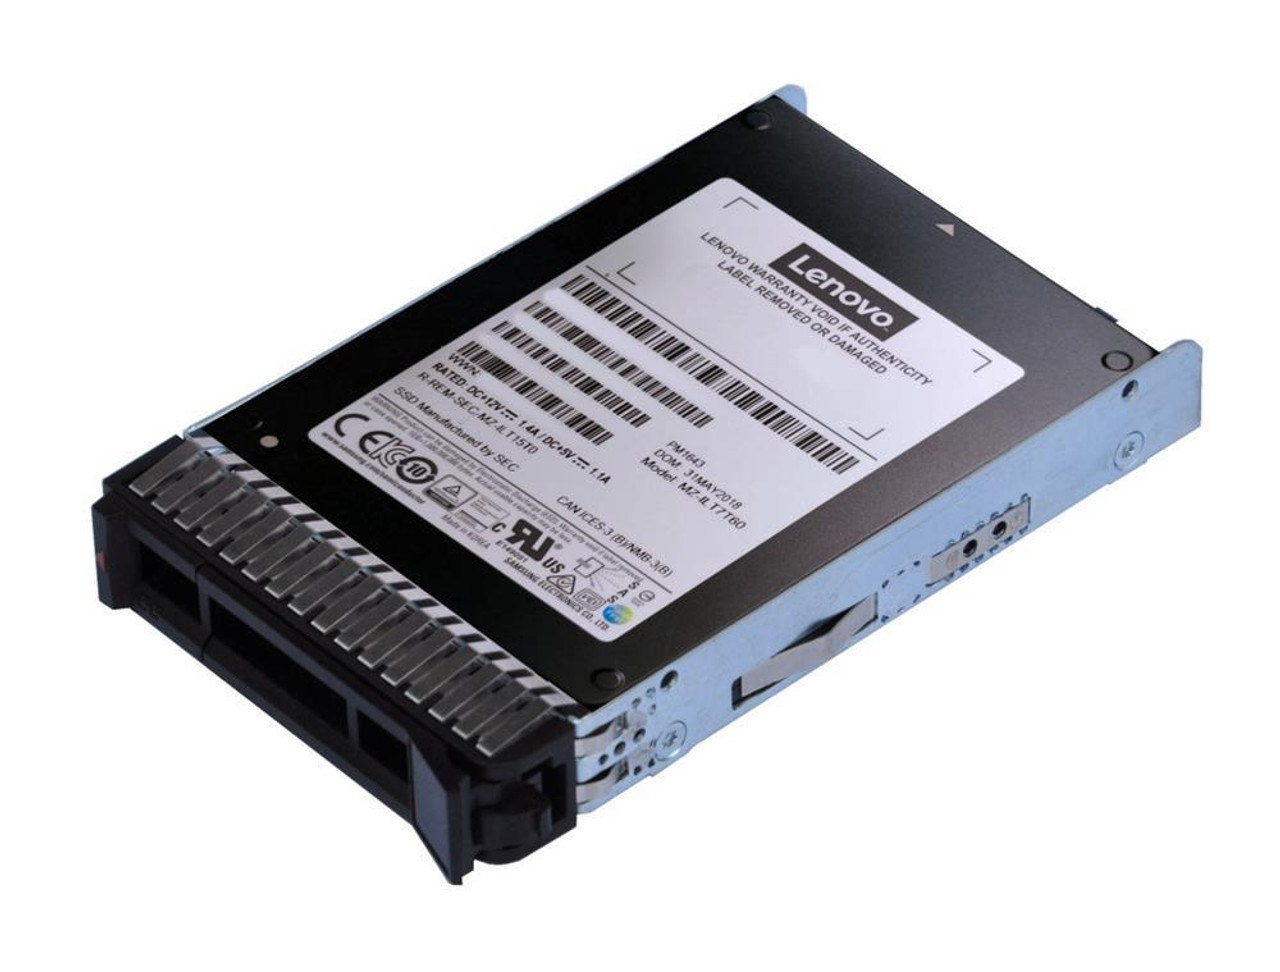 PM1643A HPE 1.92TB SAS 12Gbps Read Intensive 2.5-inch Internal Solid State Drive (SSD) with Smart Carrier